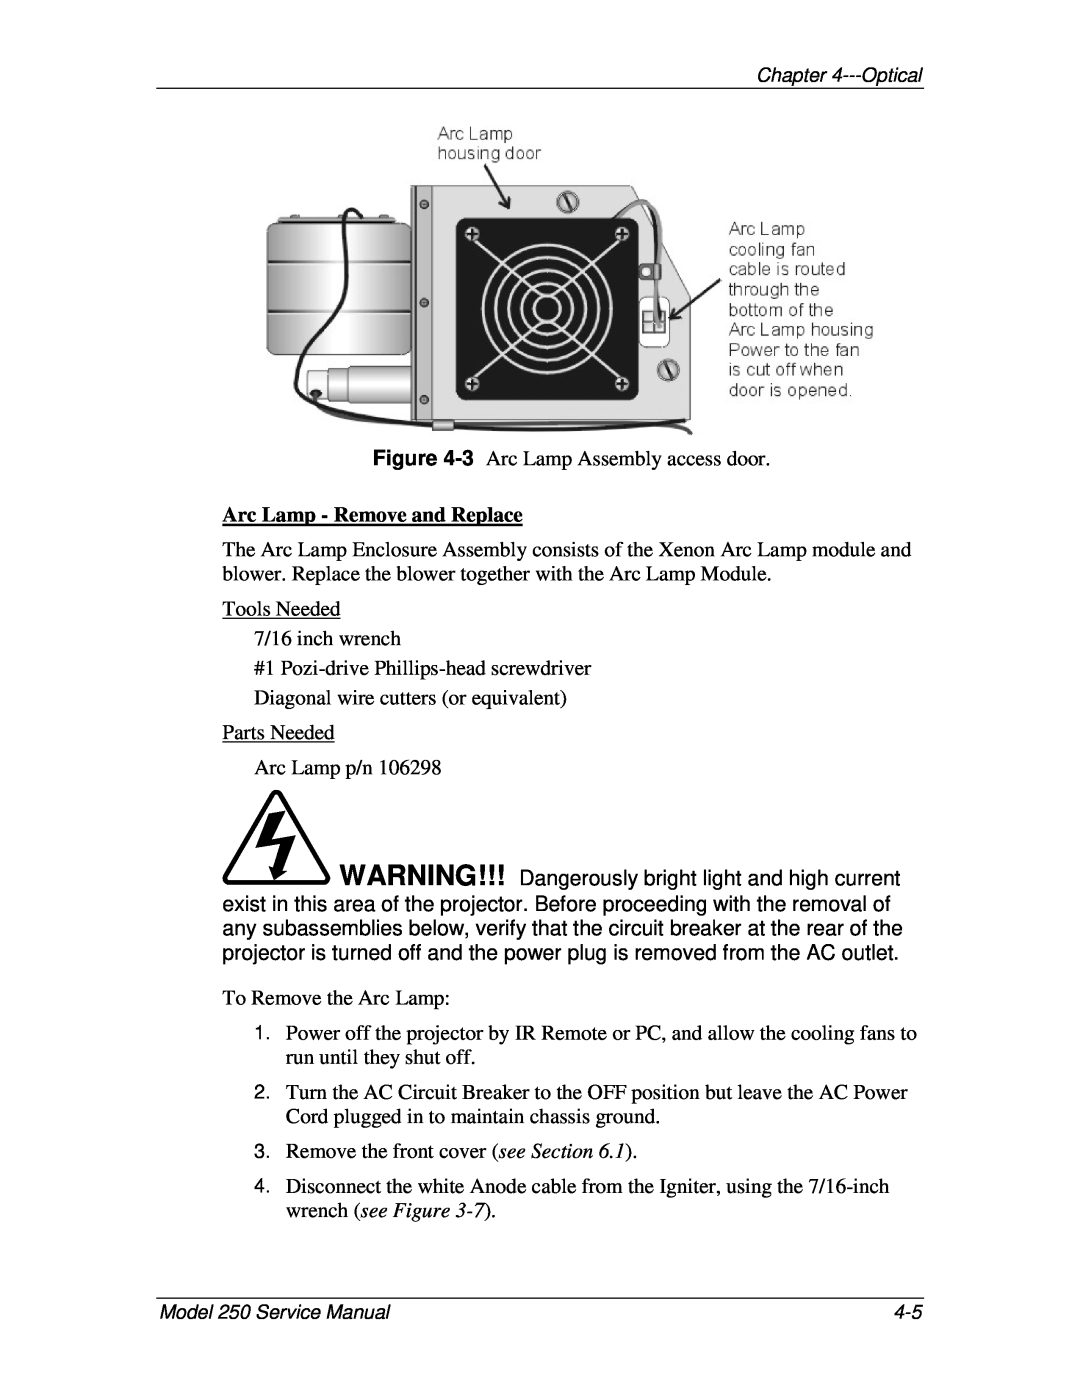 JVC 250 service manual Arc Lamp - Remove and Replace 